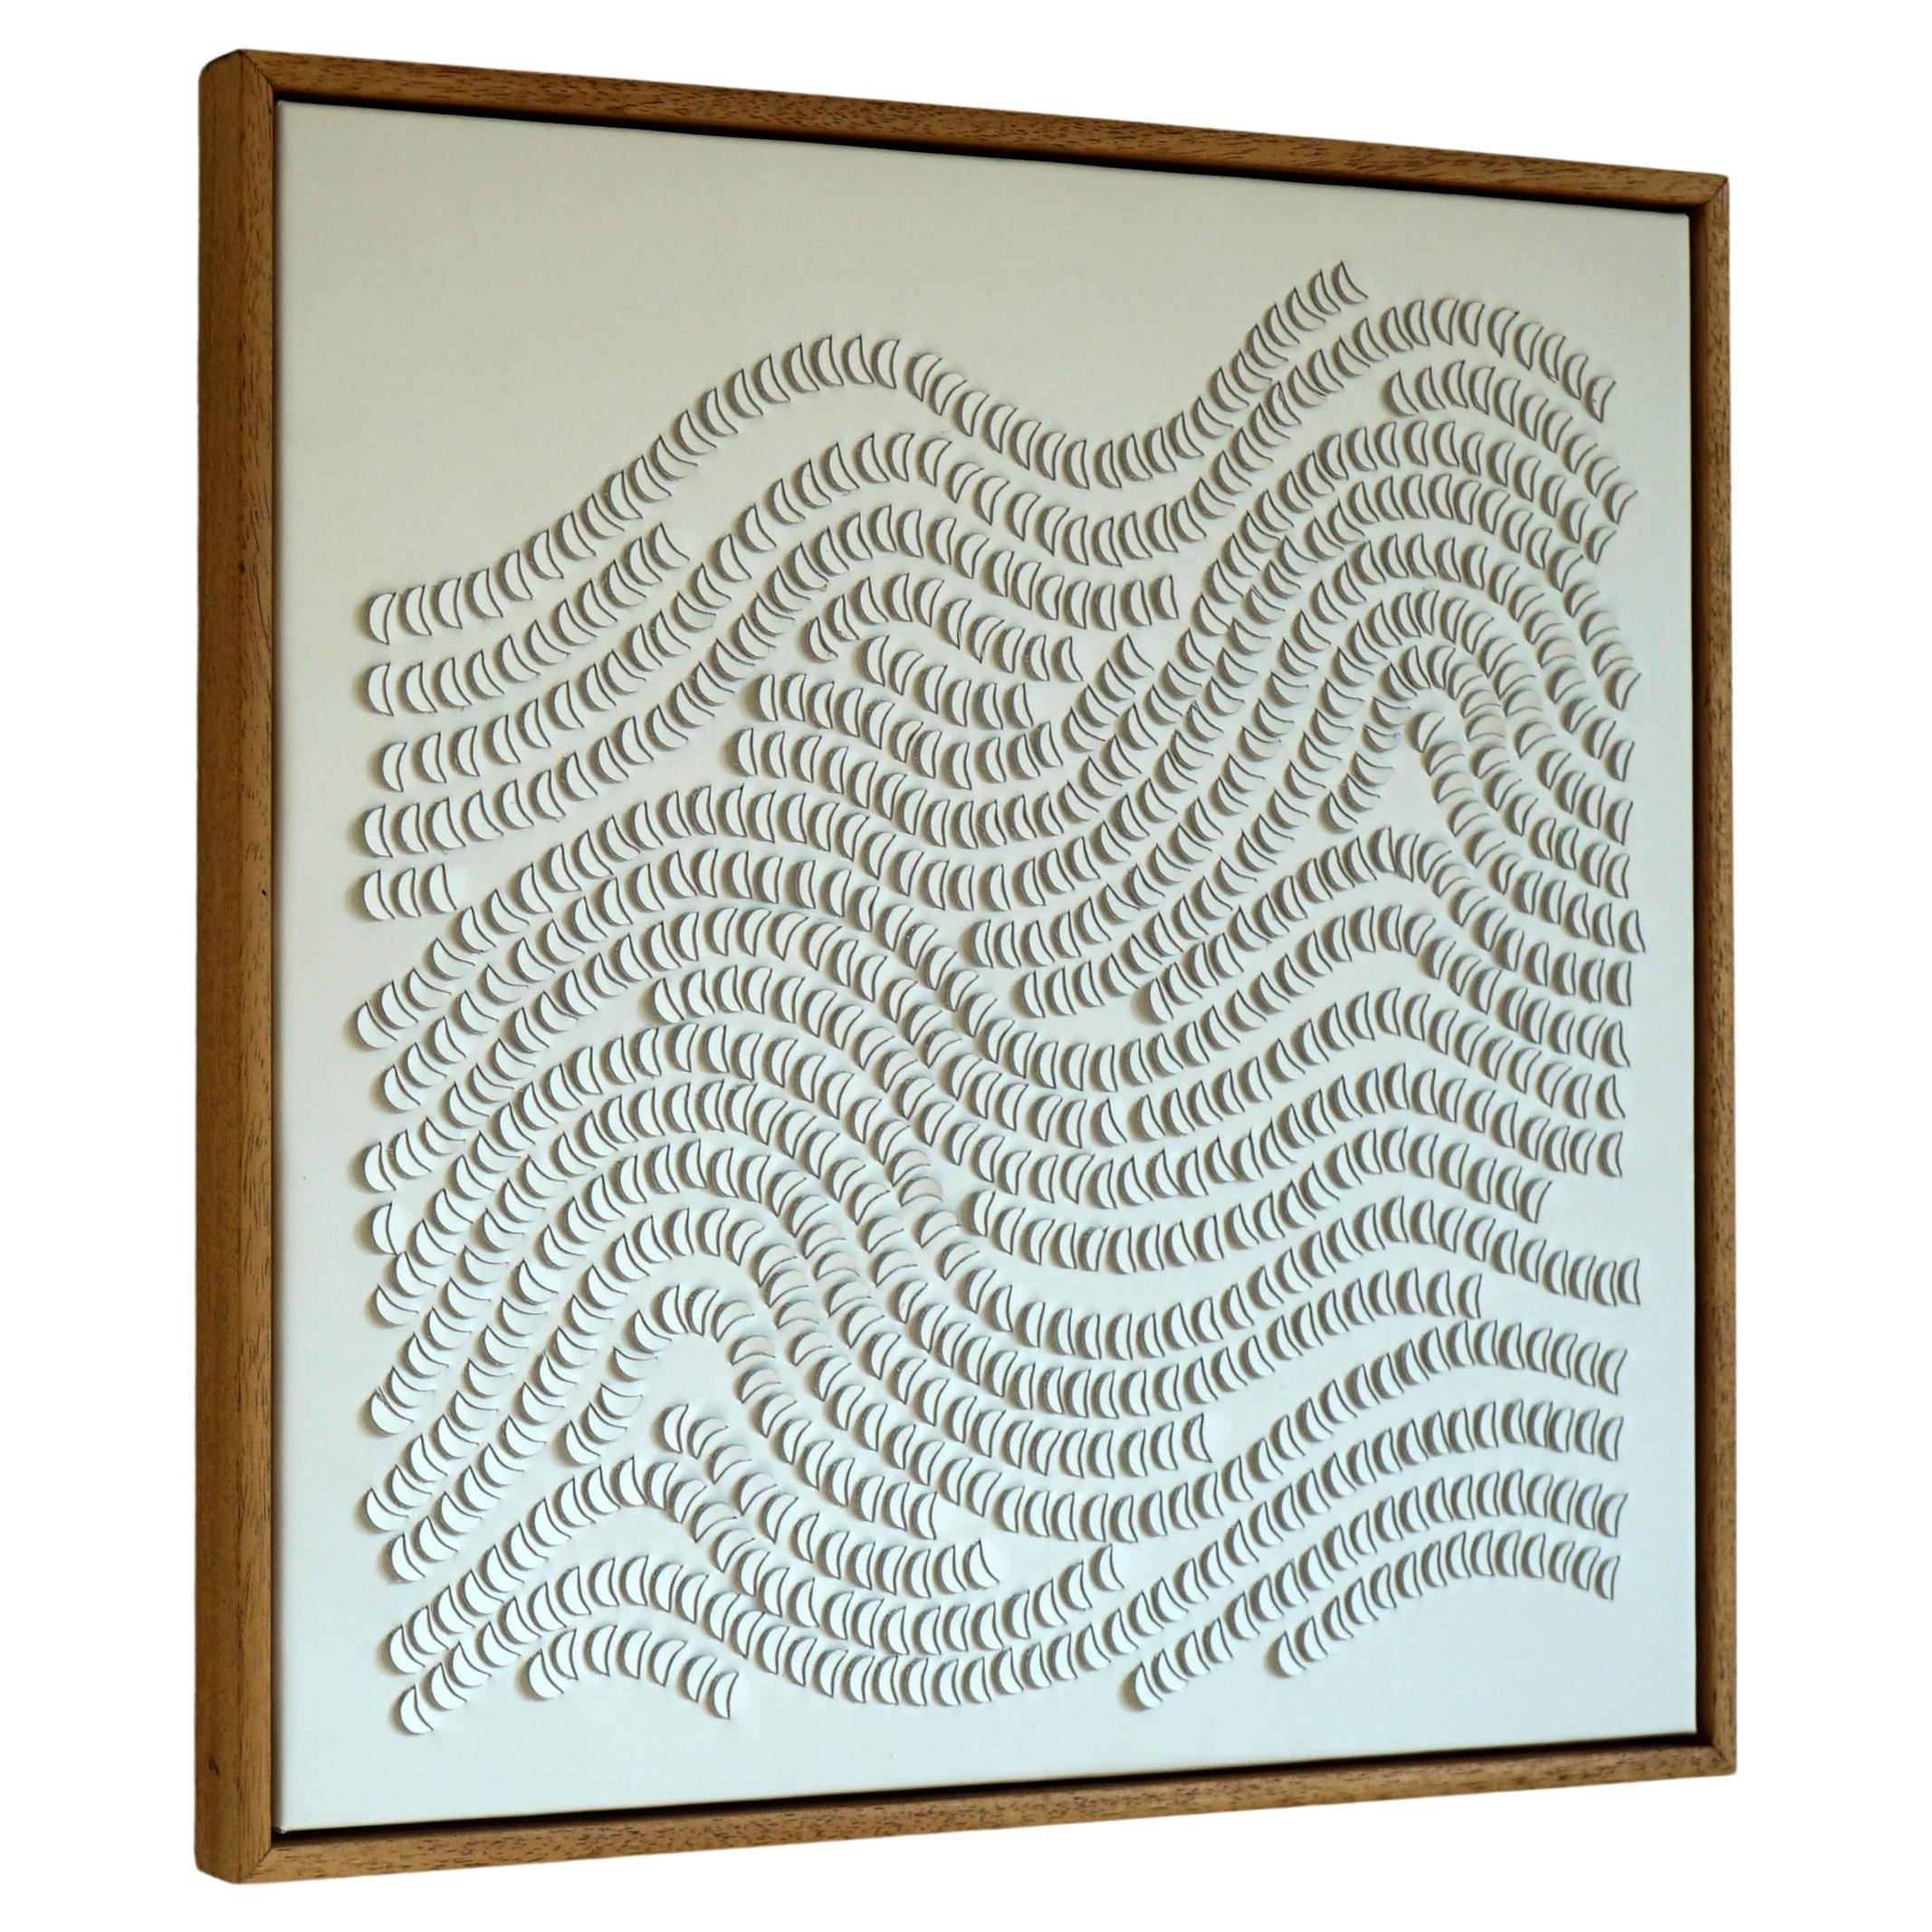 Disks, A Piece of 3D Sculptural White Leather Wall Art  For Sale